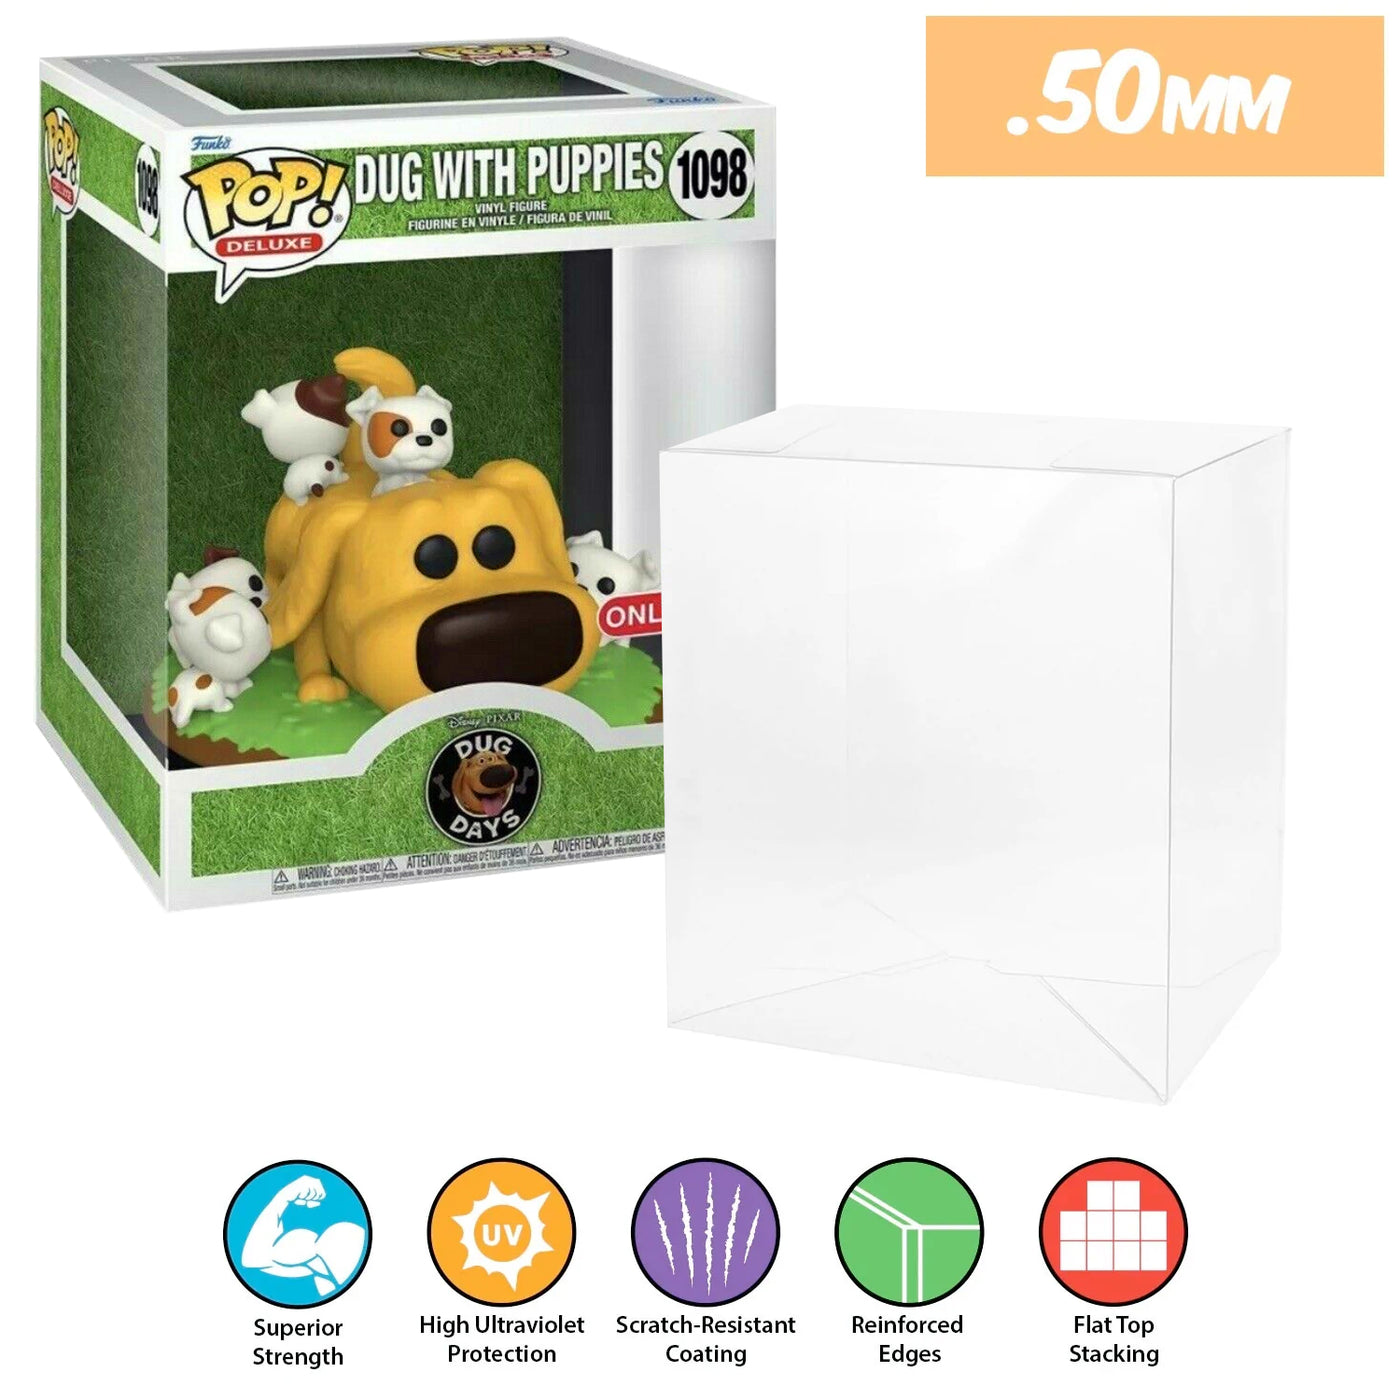 pop deluxe dug with puppies 1098 best funko pop protectors thick strong uv scratch flat top stack vinyl display geek plastic shield vaulted eco armor fits collect protect display case kollector protector